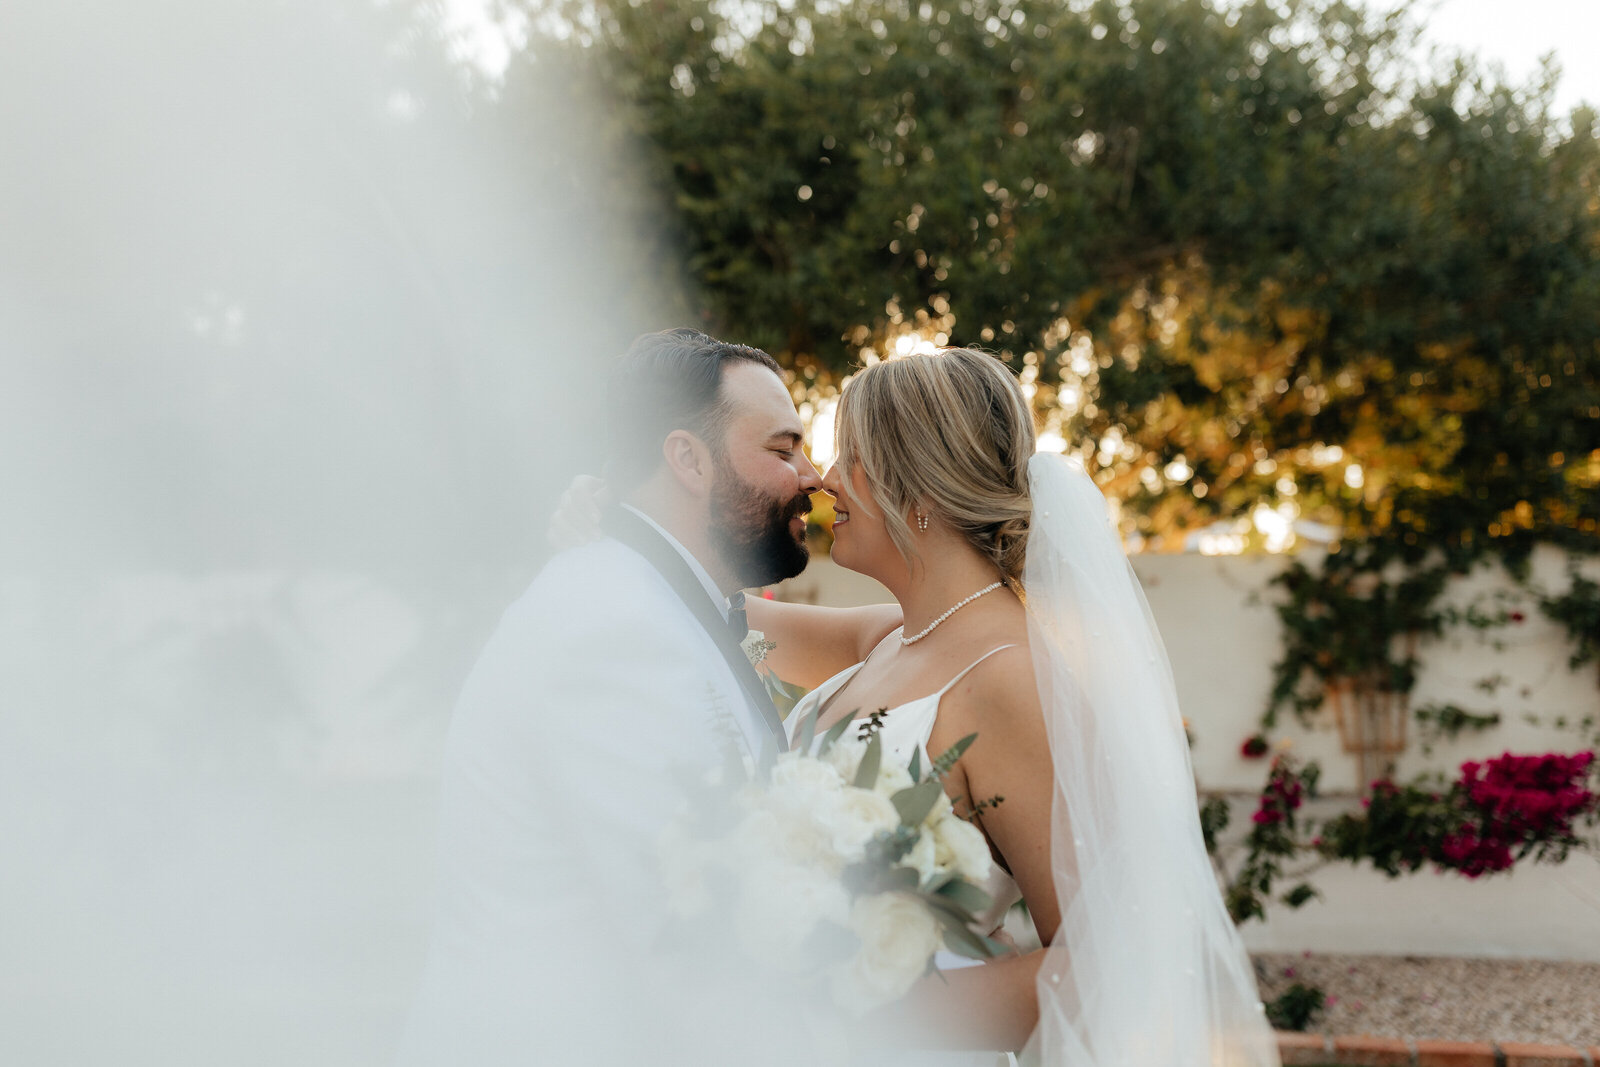 Bride and groom kiss beyond the veil on their wedding day in Chandler AZ